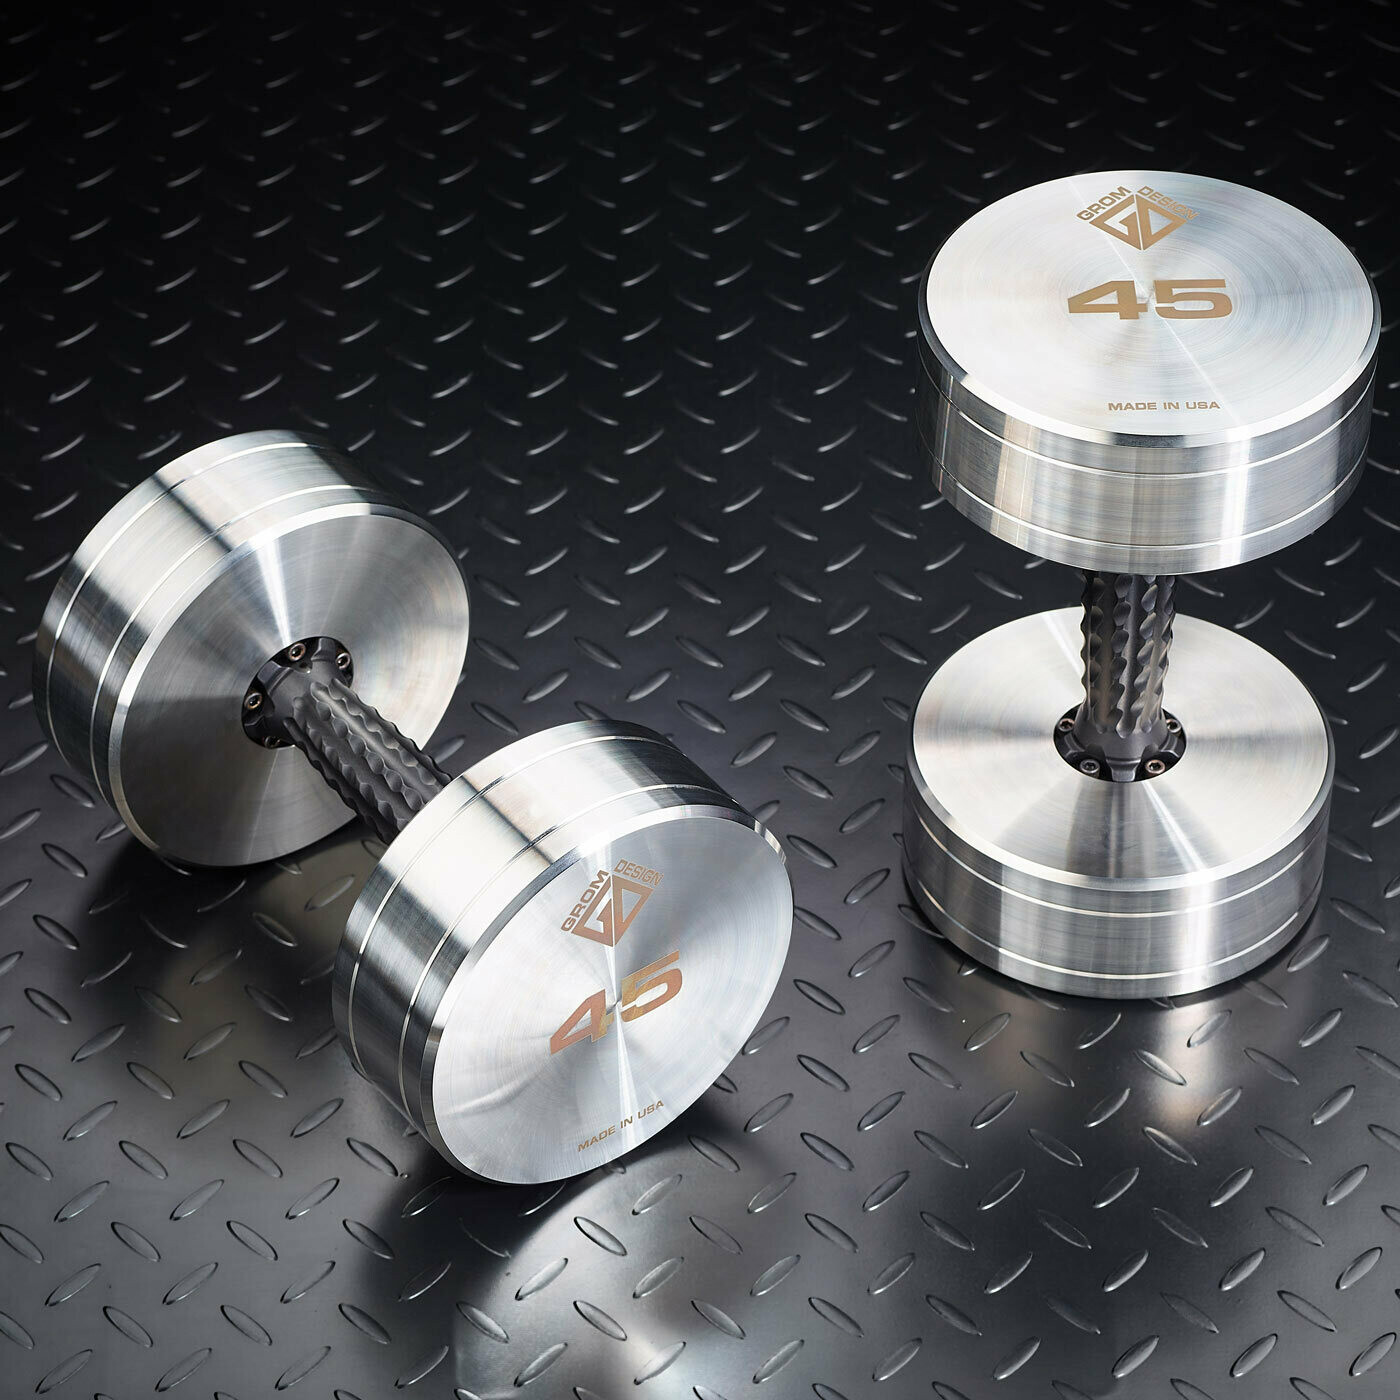 45 pound dumbbells Made in USA Stainless Steel CNC Machined